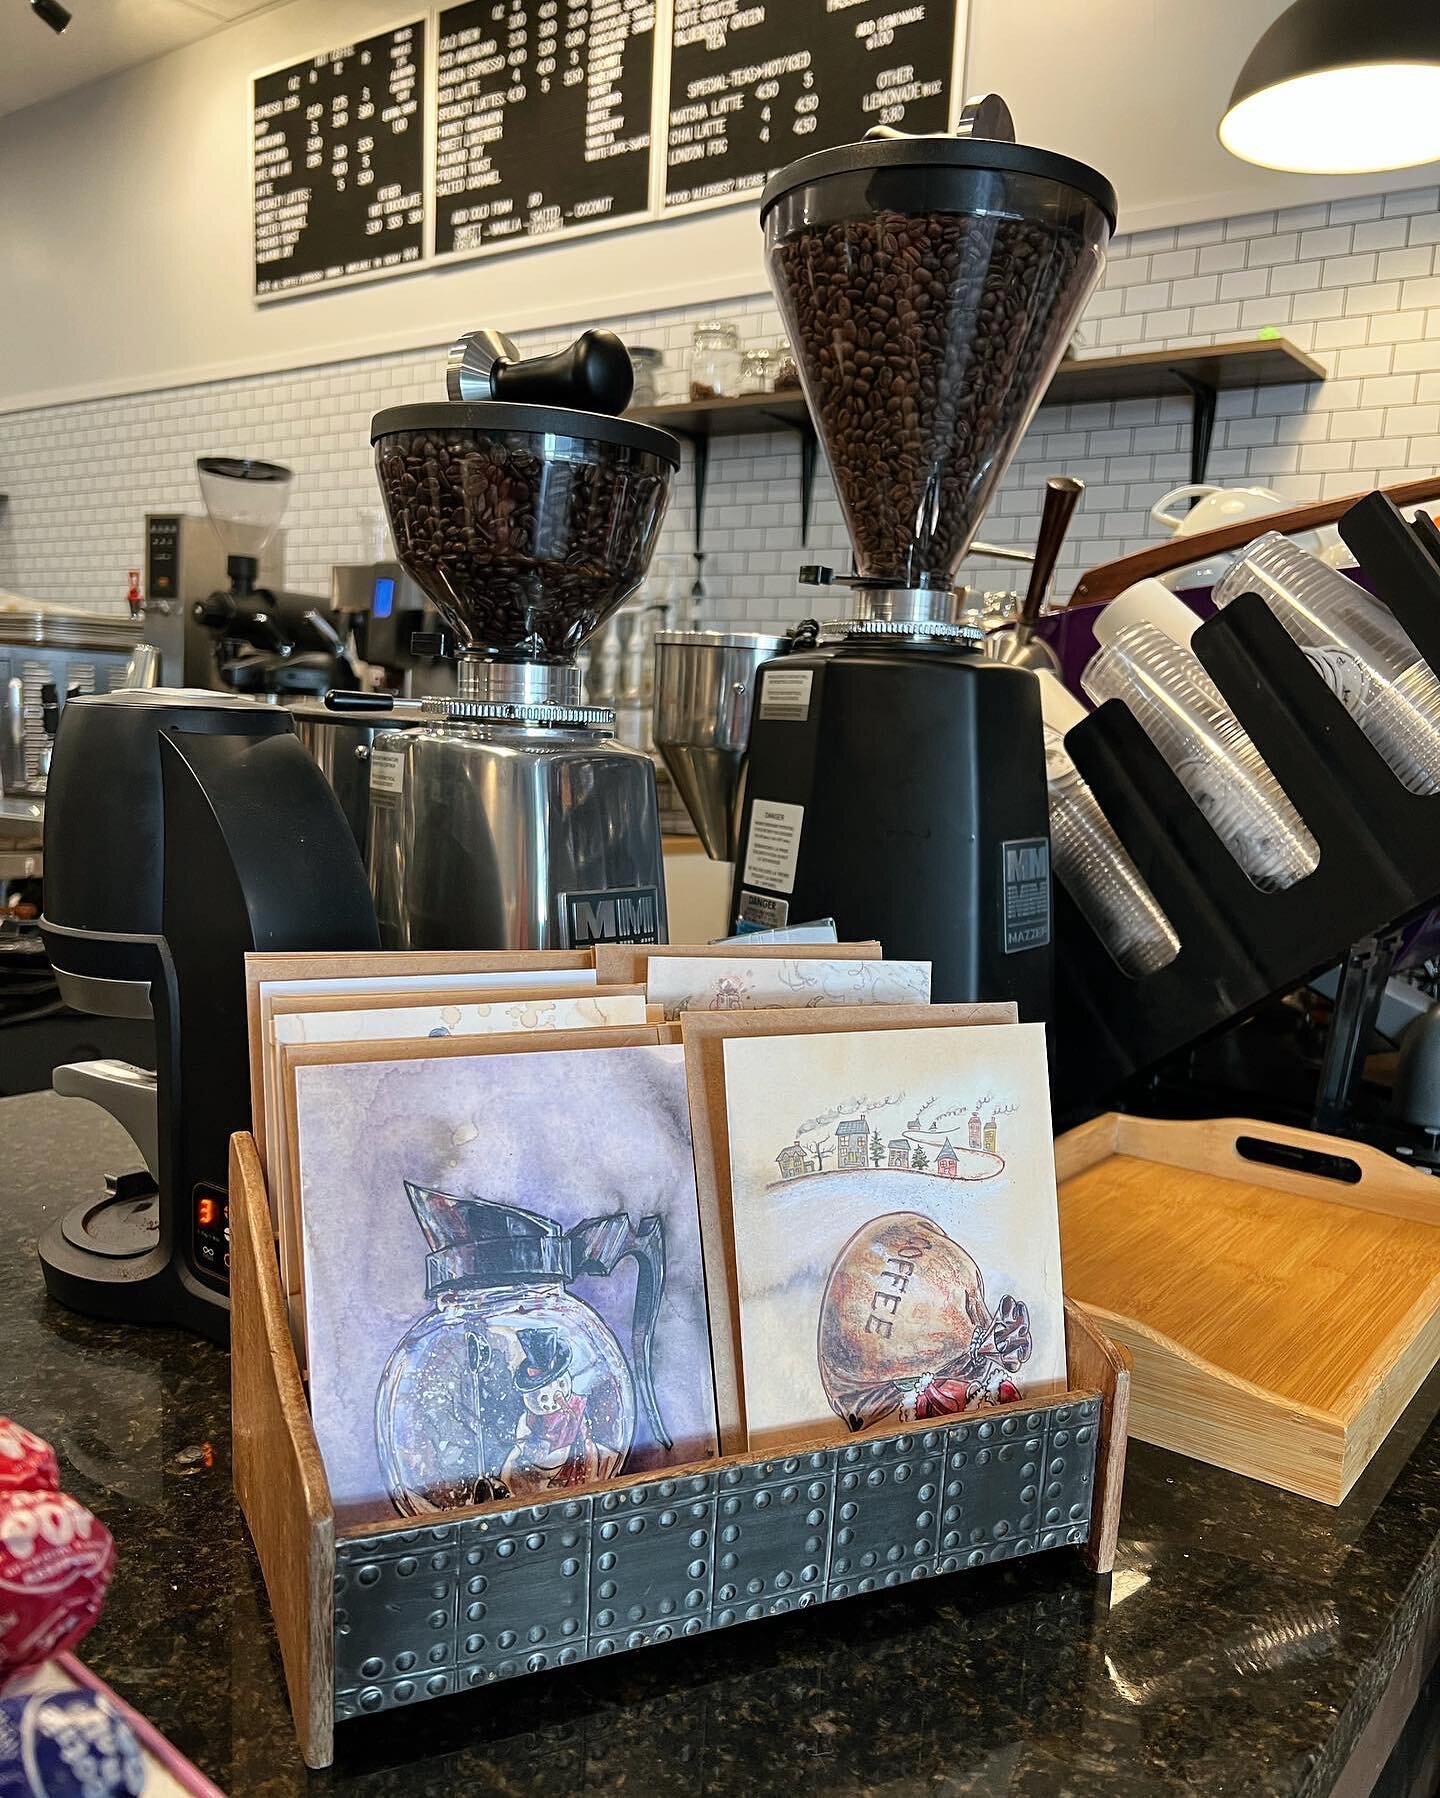 Shorter days got you feeling some kind of way? Nothing like a cup of good coffee to remedy that. And we think @bloomingheartsroastery is an excellent place to get that cup in a welcoming, cozy atmosphere. We had a great time visiting last week, and l